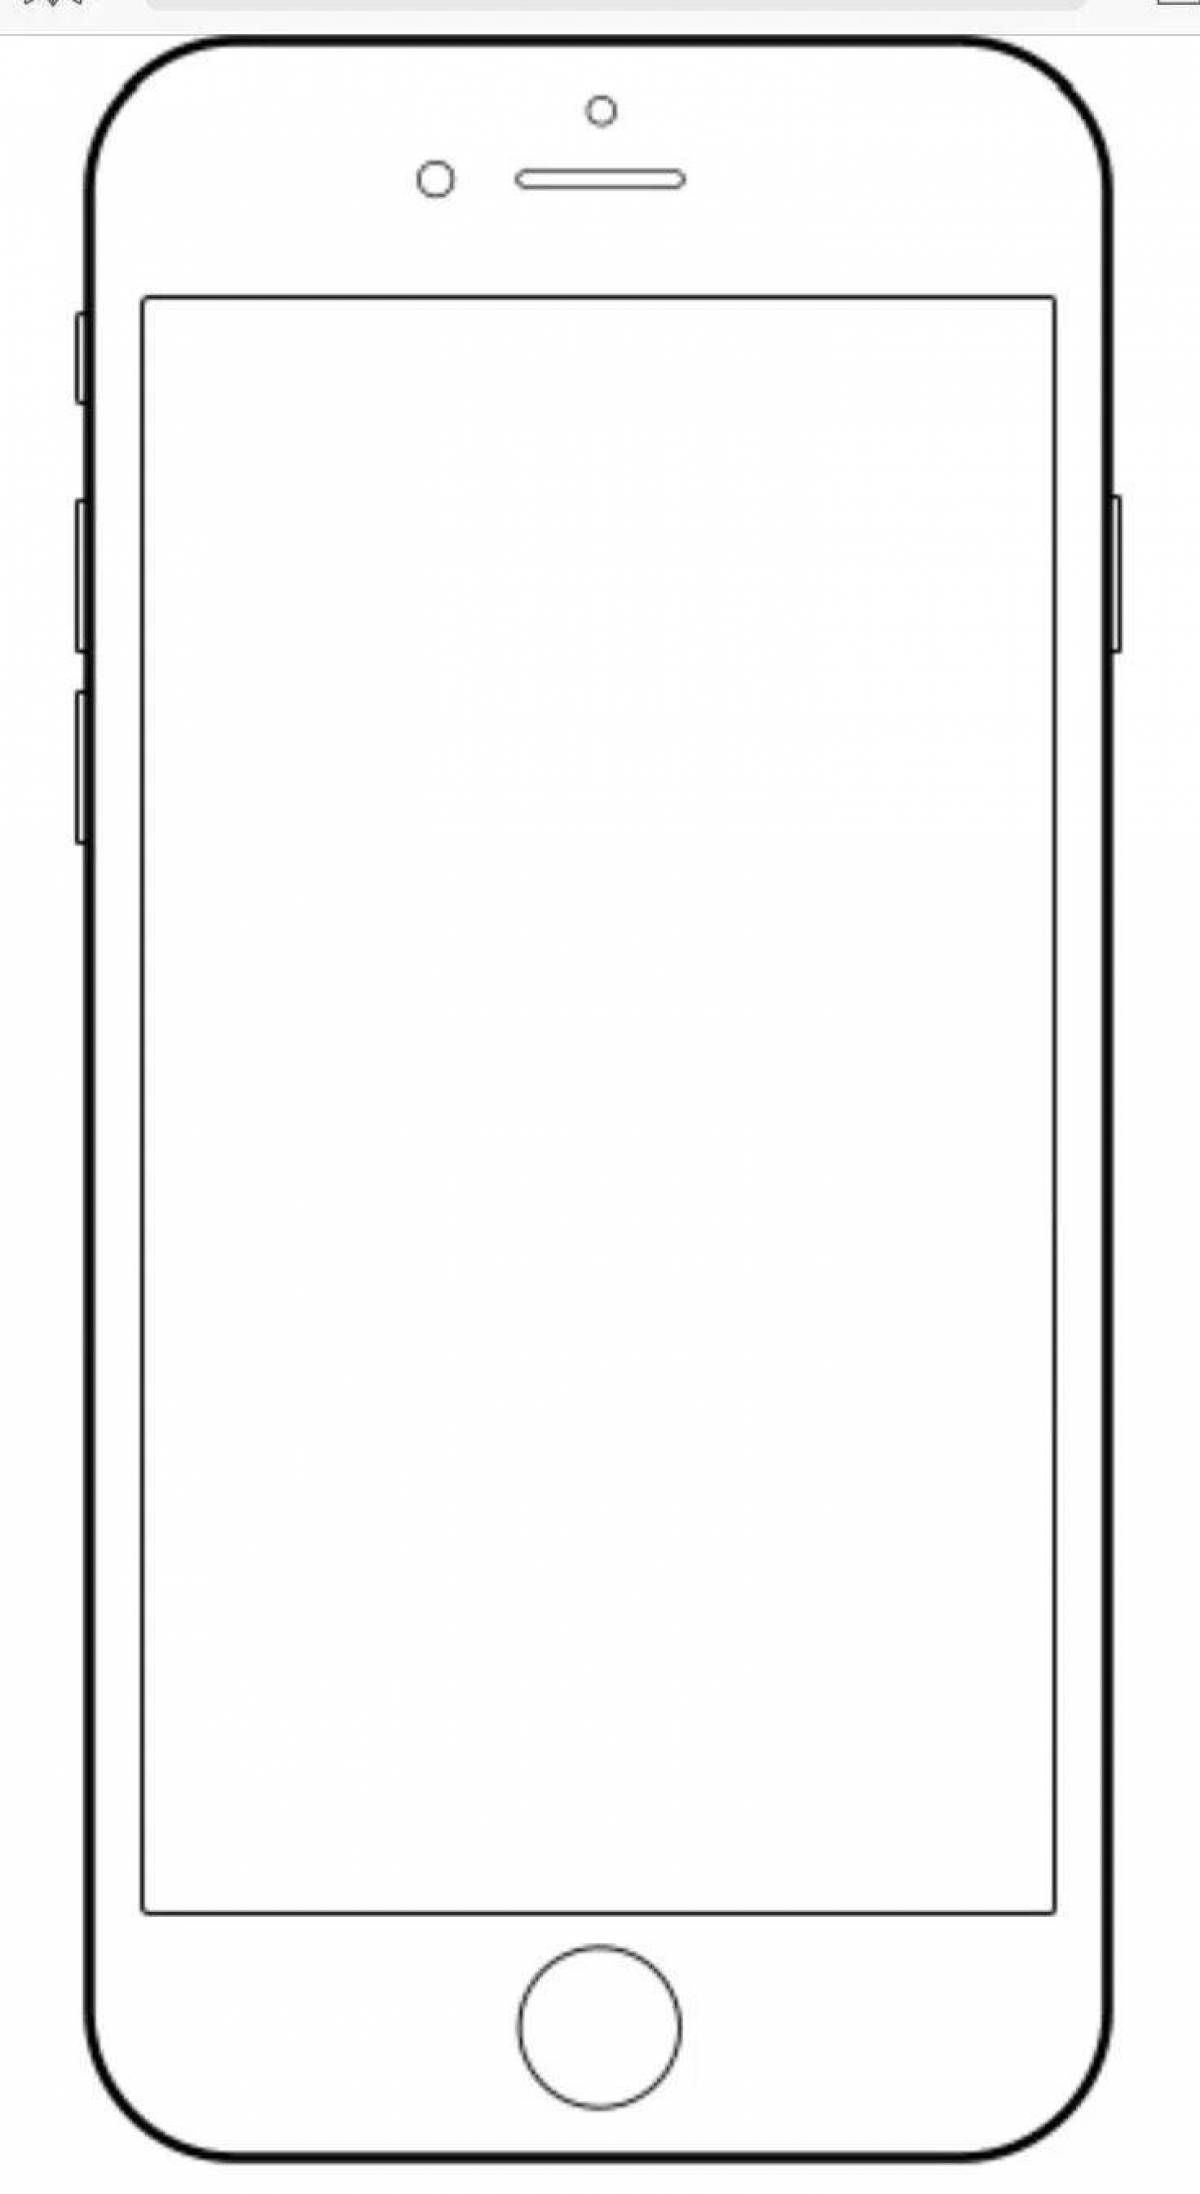 Creative phone screen coloring page